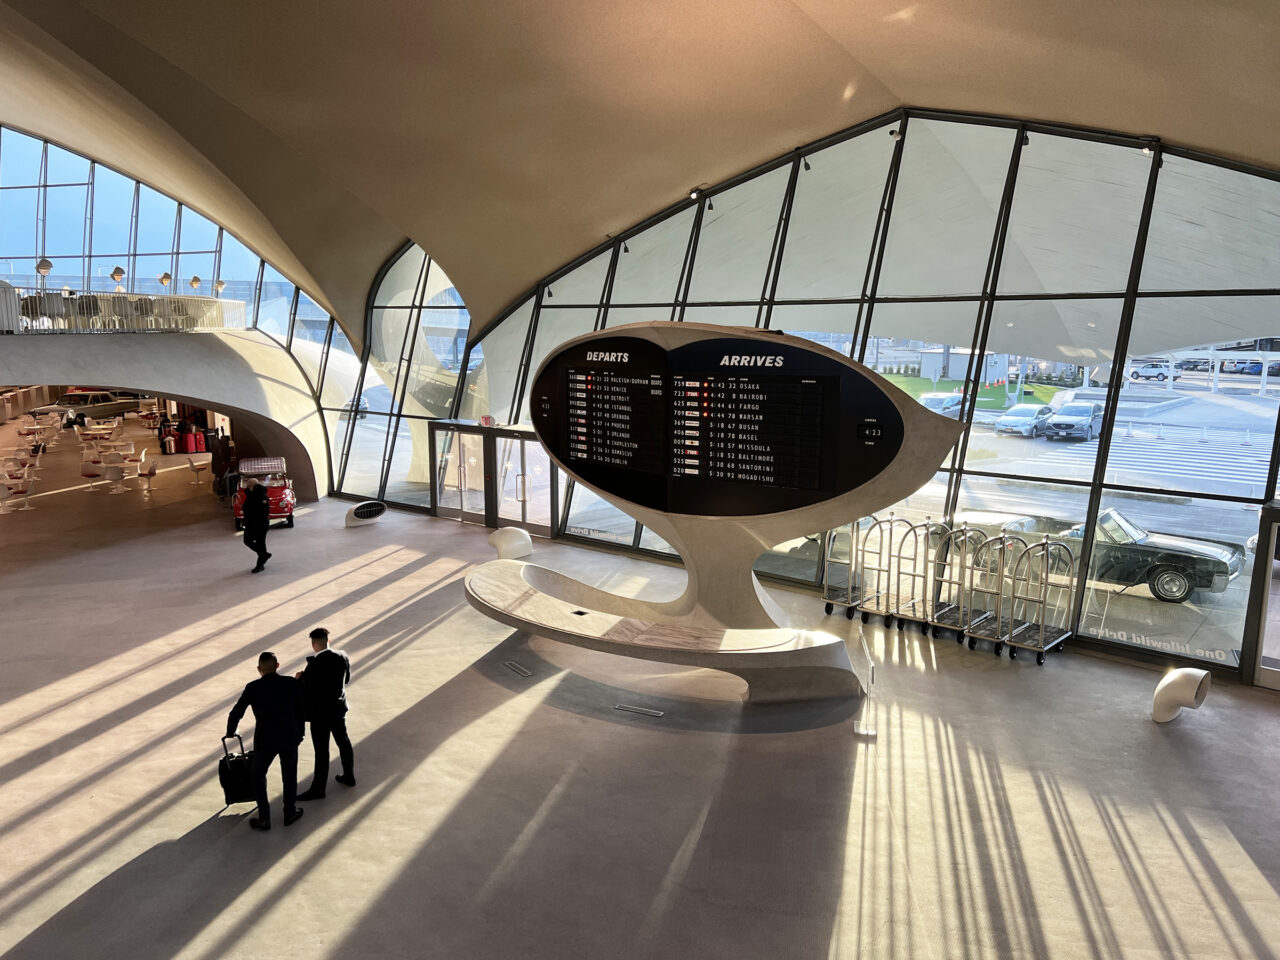 TWA Hotel departures and arrivals board